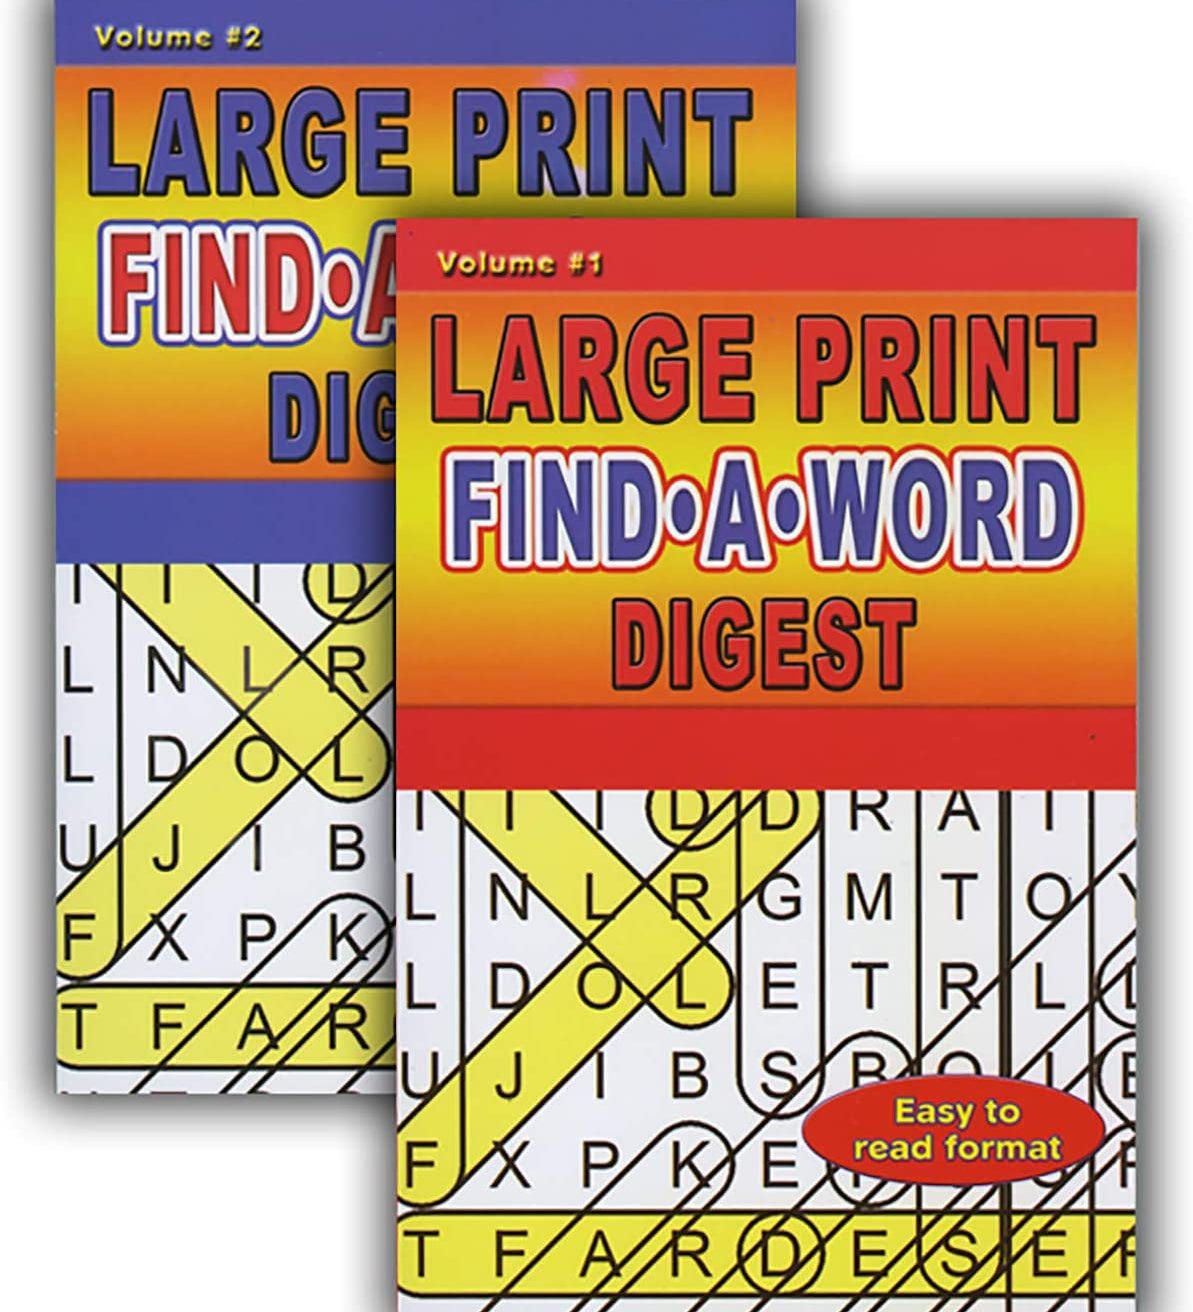 Large Print Find-A-Word Puzzles Book Digest Size.